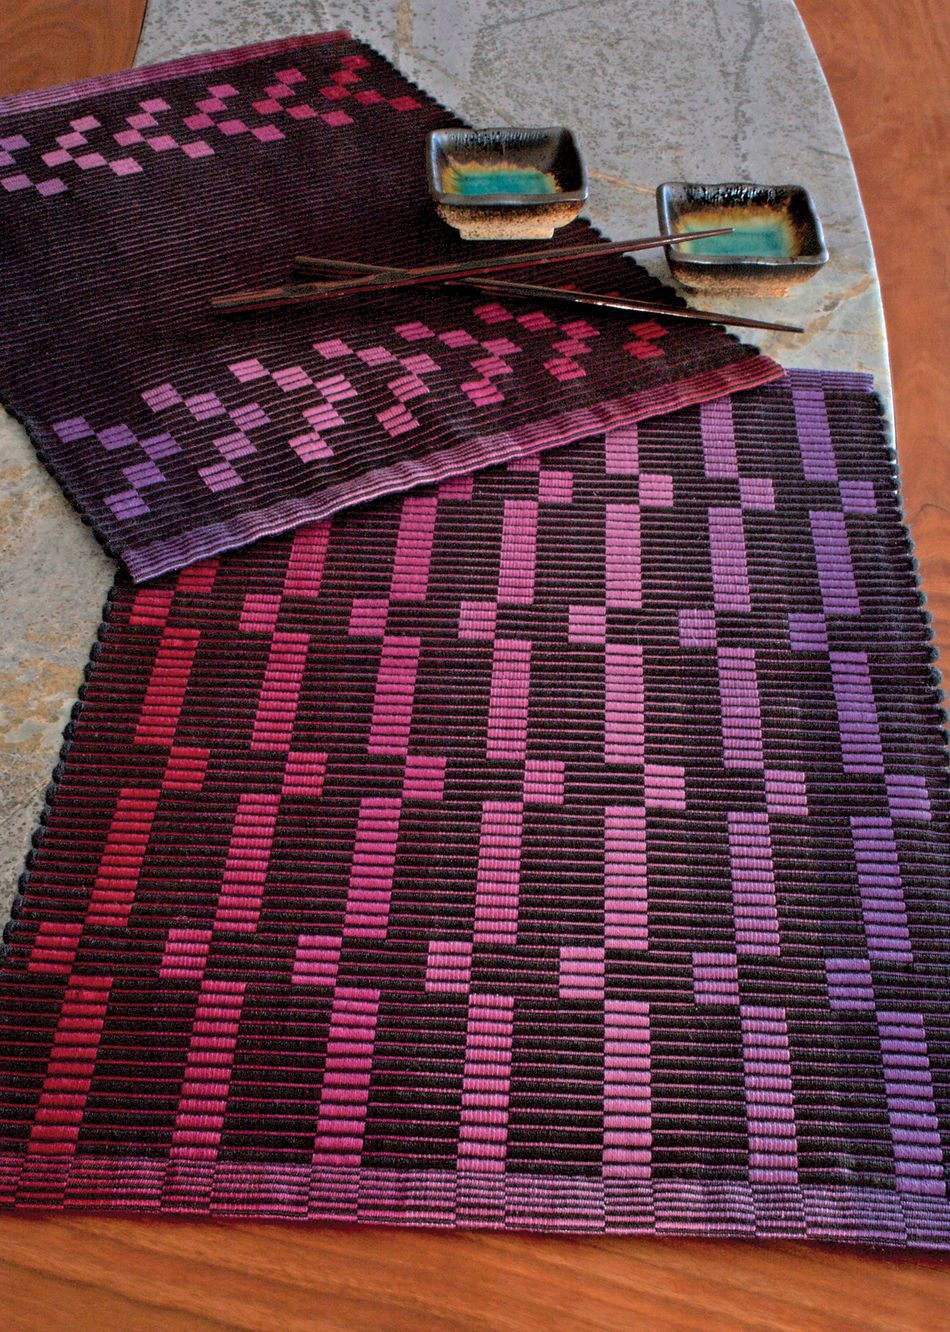 Weaving Patterns Rep Weave Placemat Pattern  102 Pearl Cotton